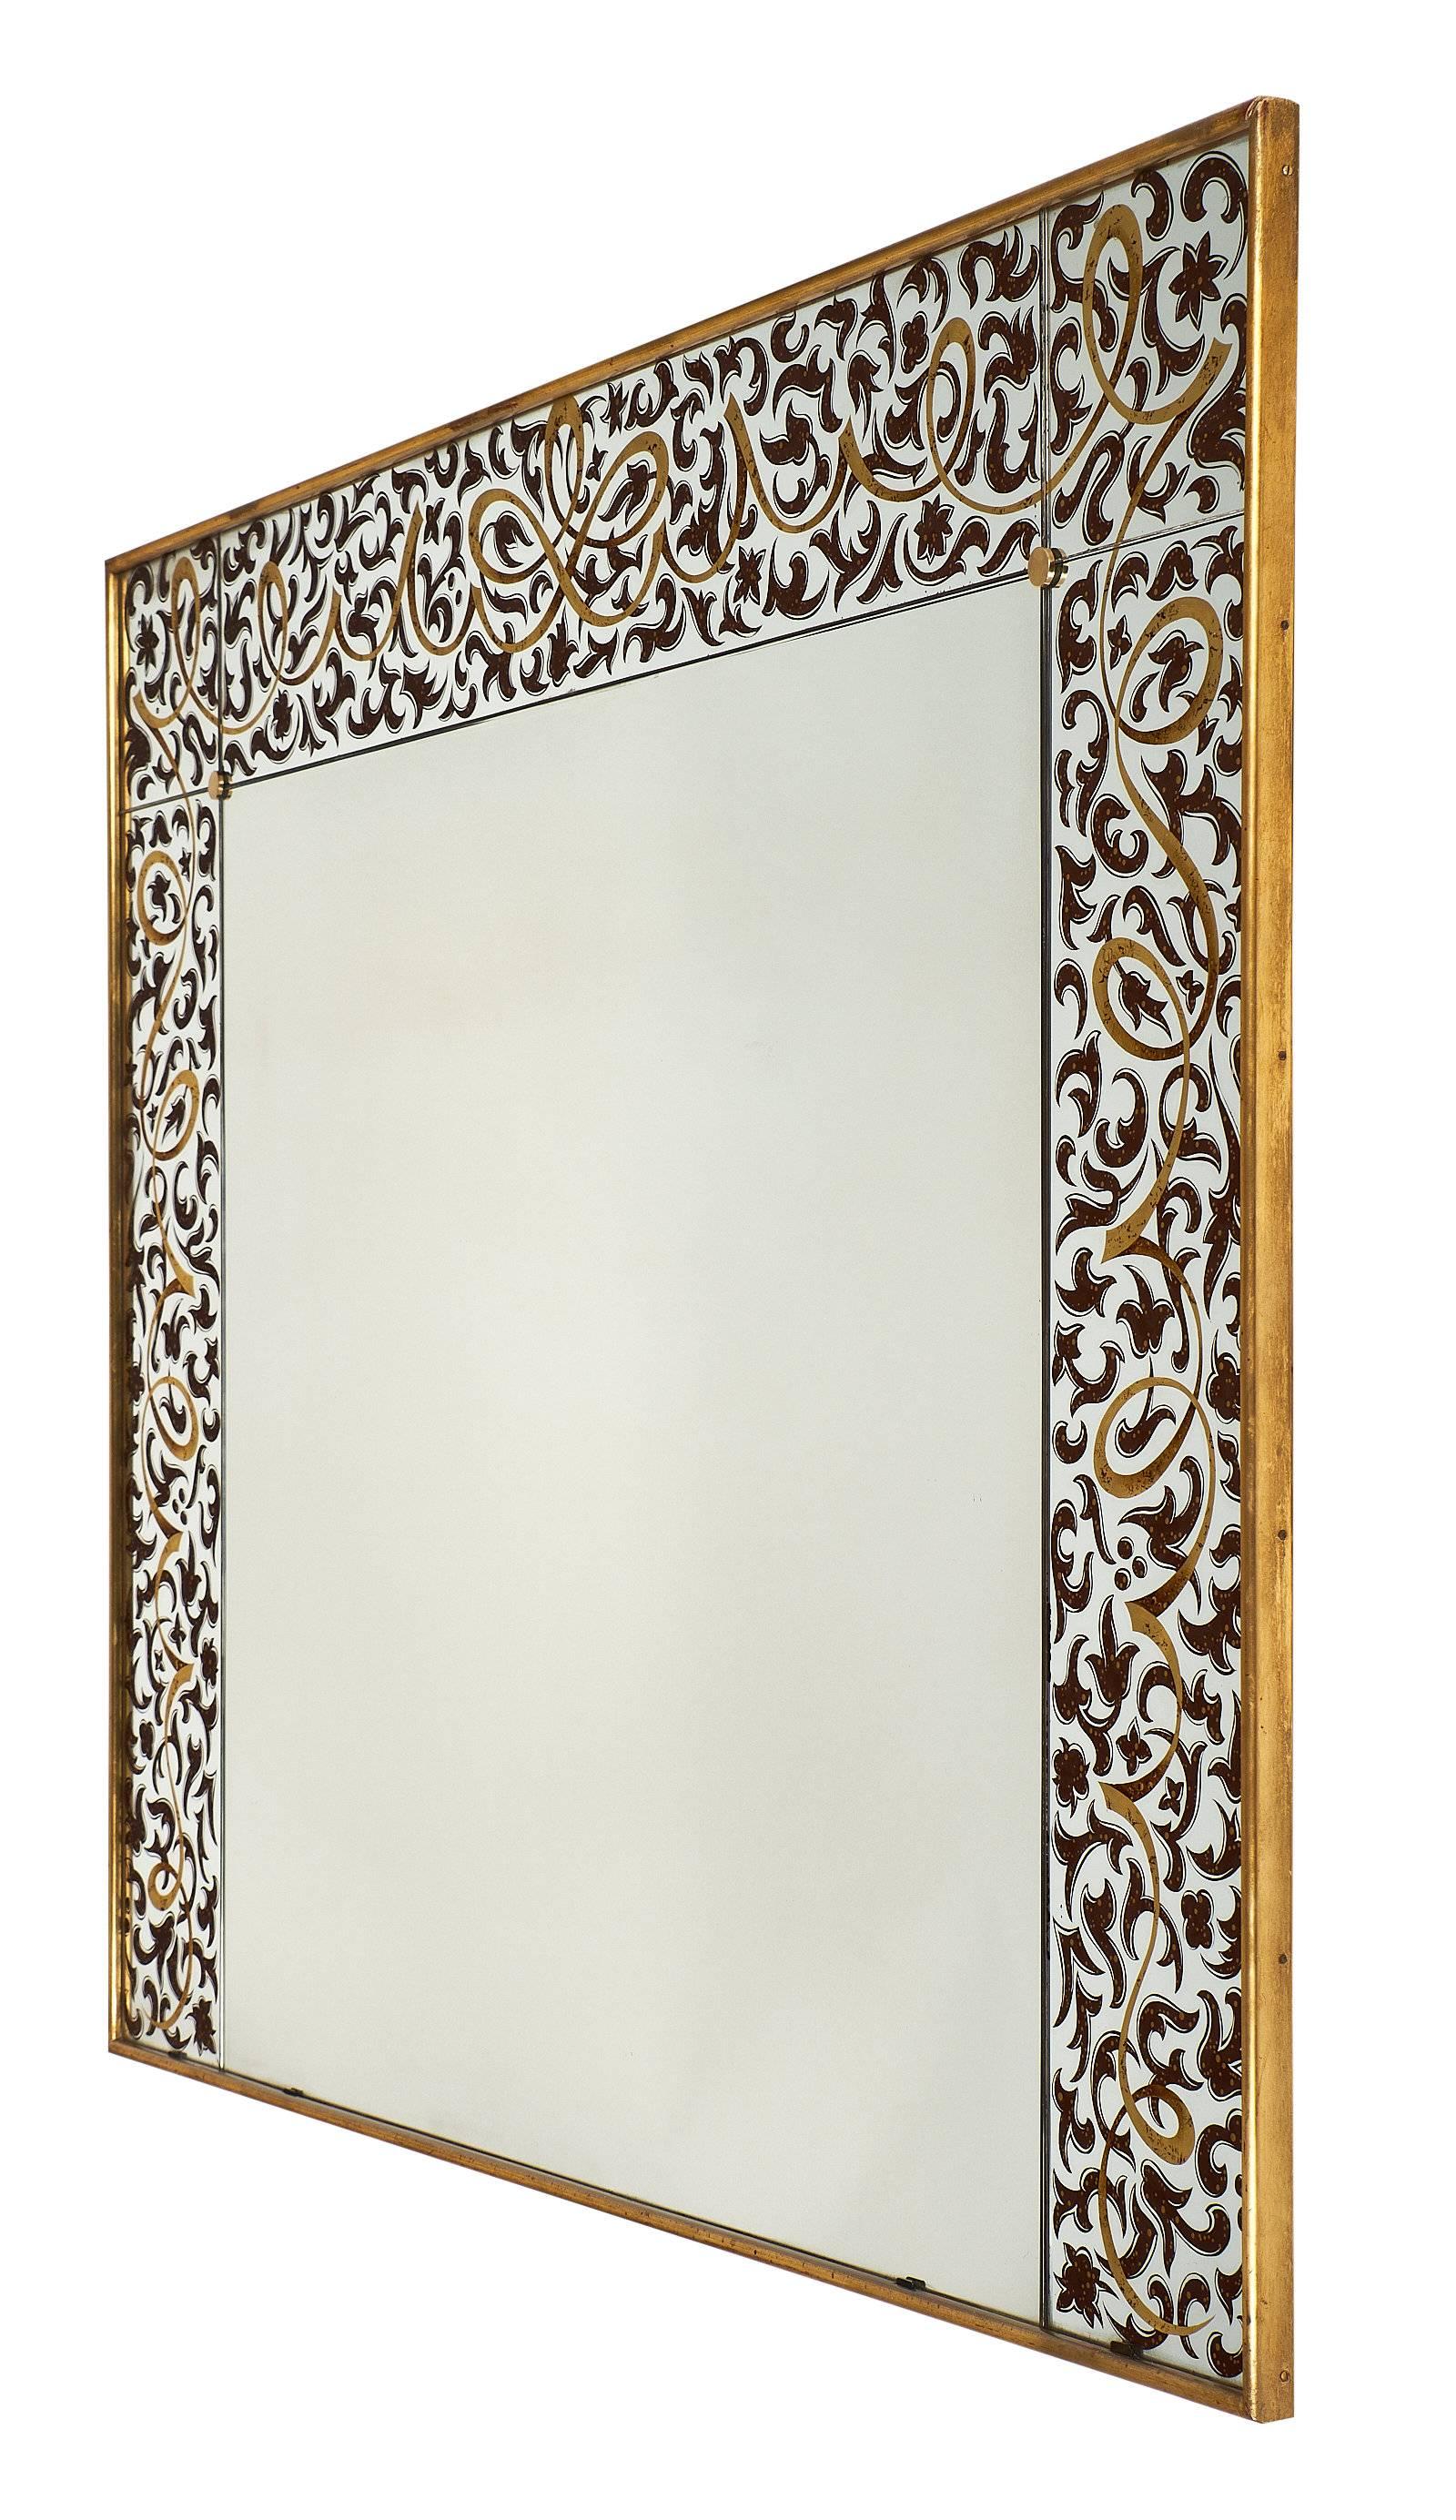 An important French Art Deco period “Grand Salon” mirror with an outer frame formed by finely églomiséd work in gold and bronze colors representing ribbons, arabesques, and scrolls in a very dynamic composition. The piece is framed with 23-karat